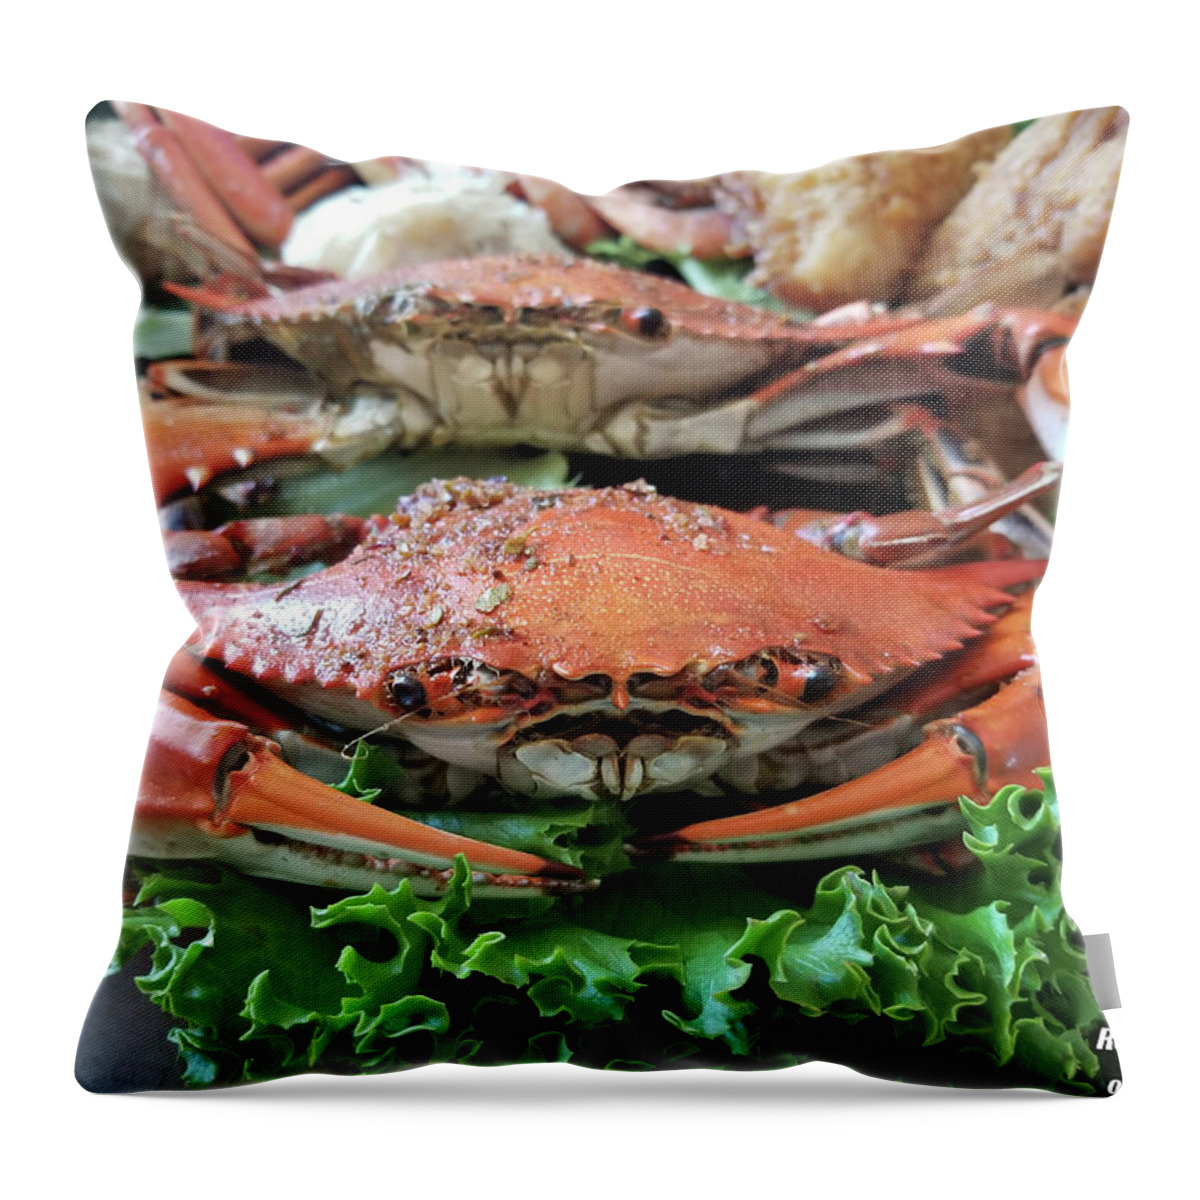 Crab Throw Pillow featuring the photograph Maryland Crab On Lettuce by Robert Banach